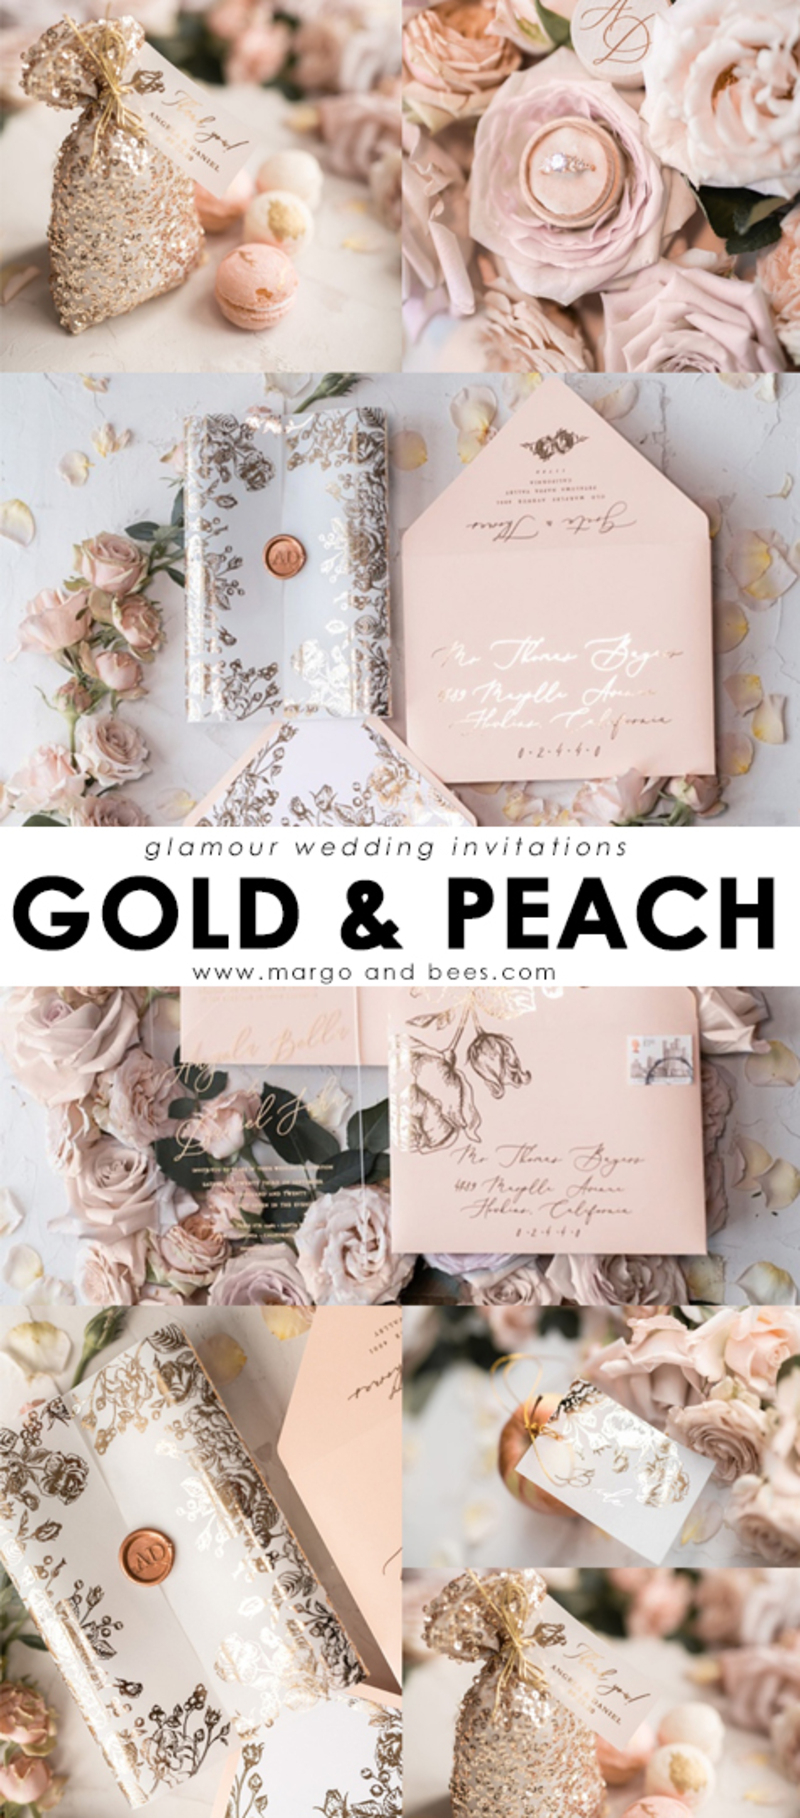 Acrylic Transparent Wedding Invitations Gold  Vellum Roses Wrap Glitter Envelope with Peach  Flowers Wax Seal -1